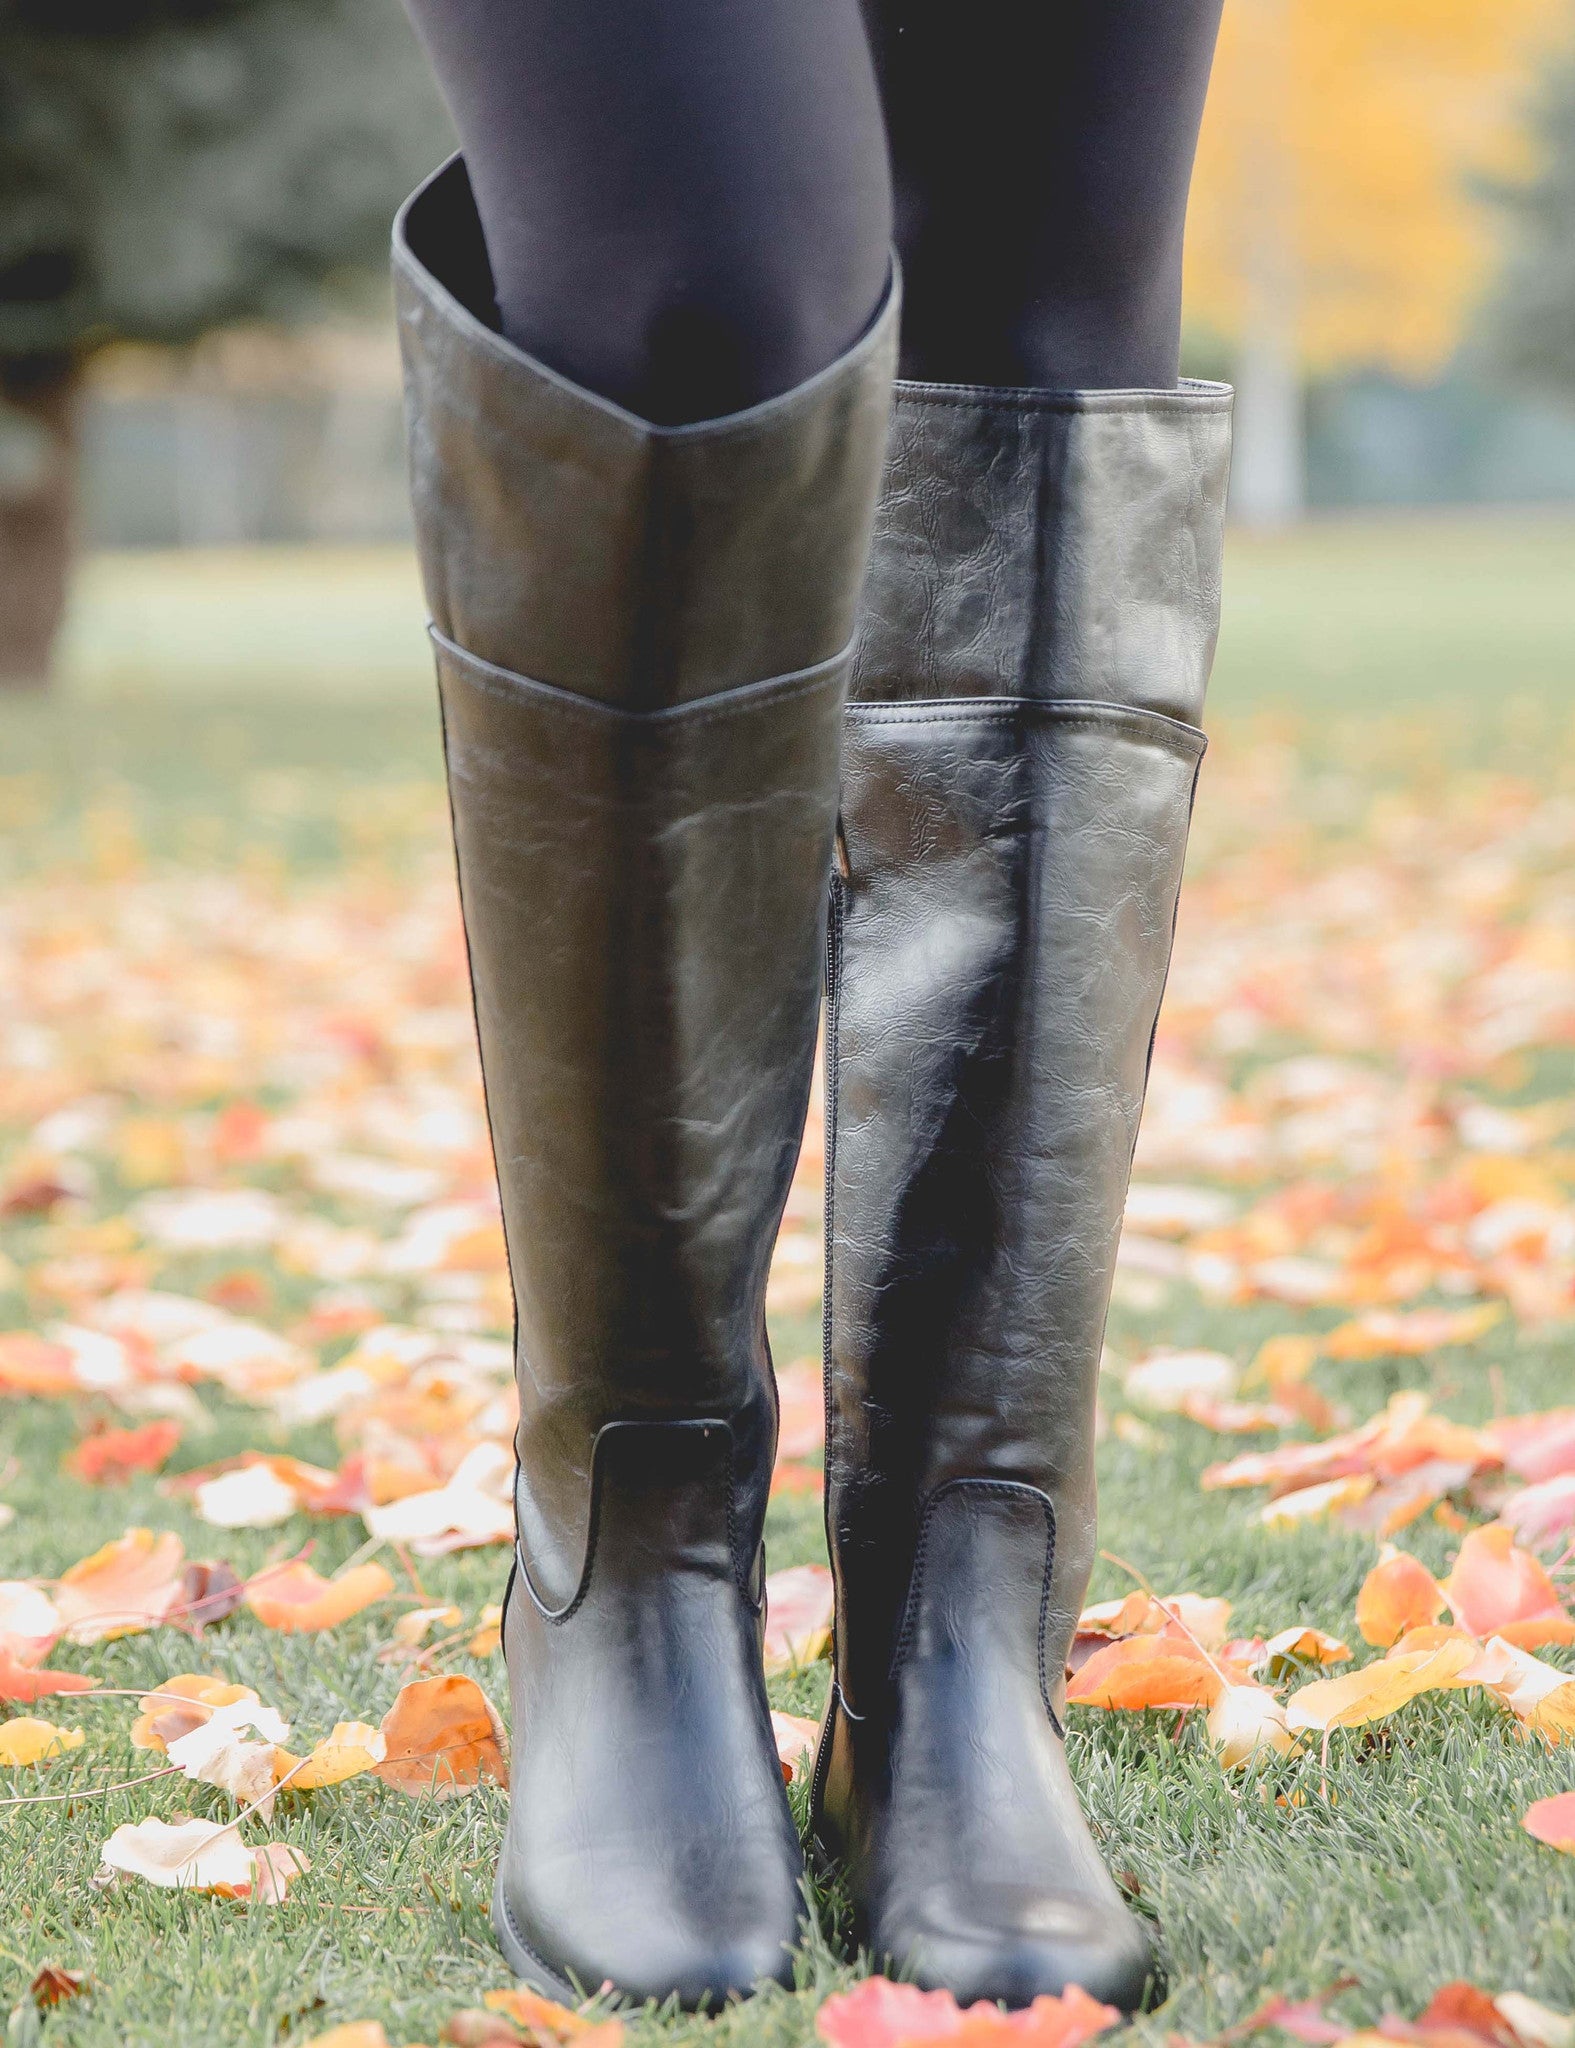 How The Non-Equestrian Wears Riding Boots – SimpleAddiction